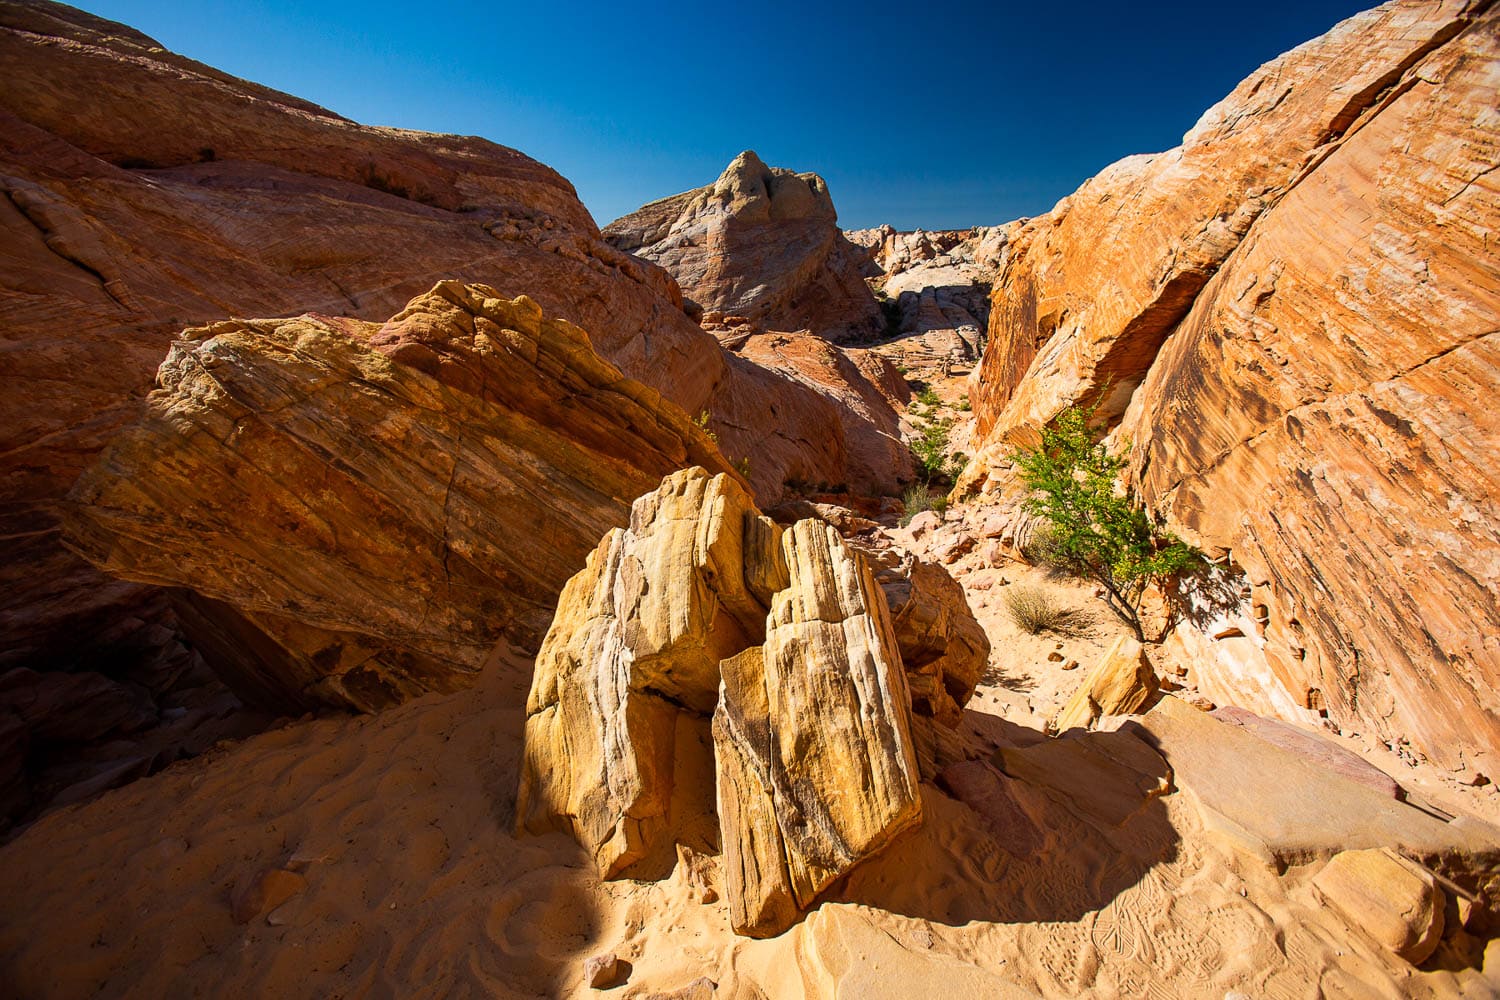 The white domes hike in Valley of fire is one of the most colorful places in the desert.